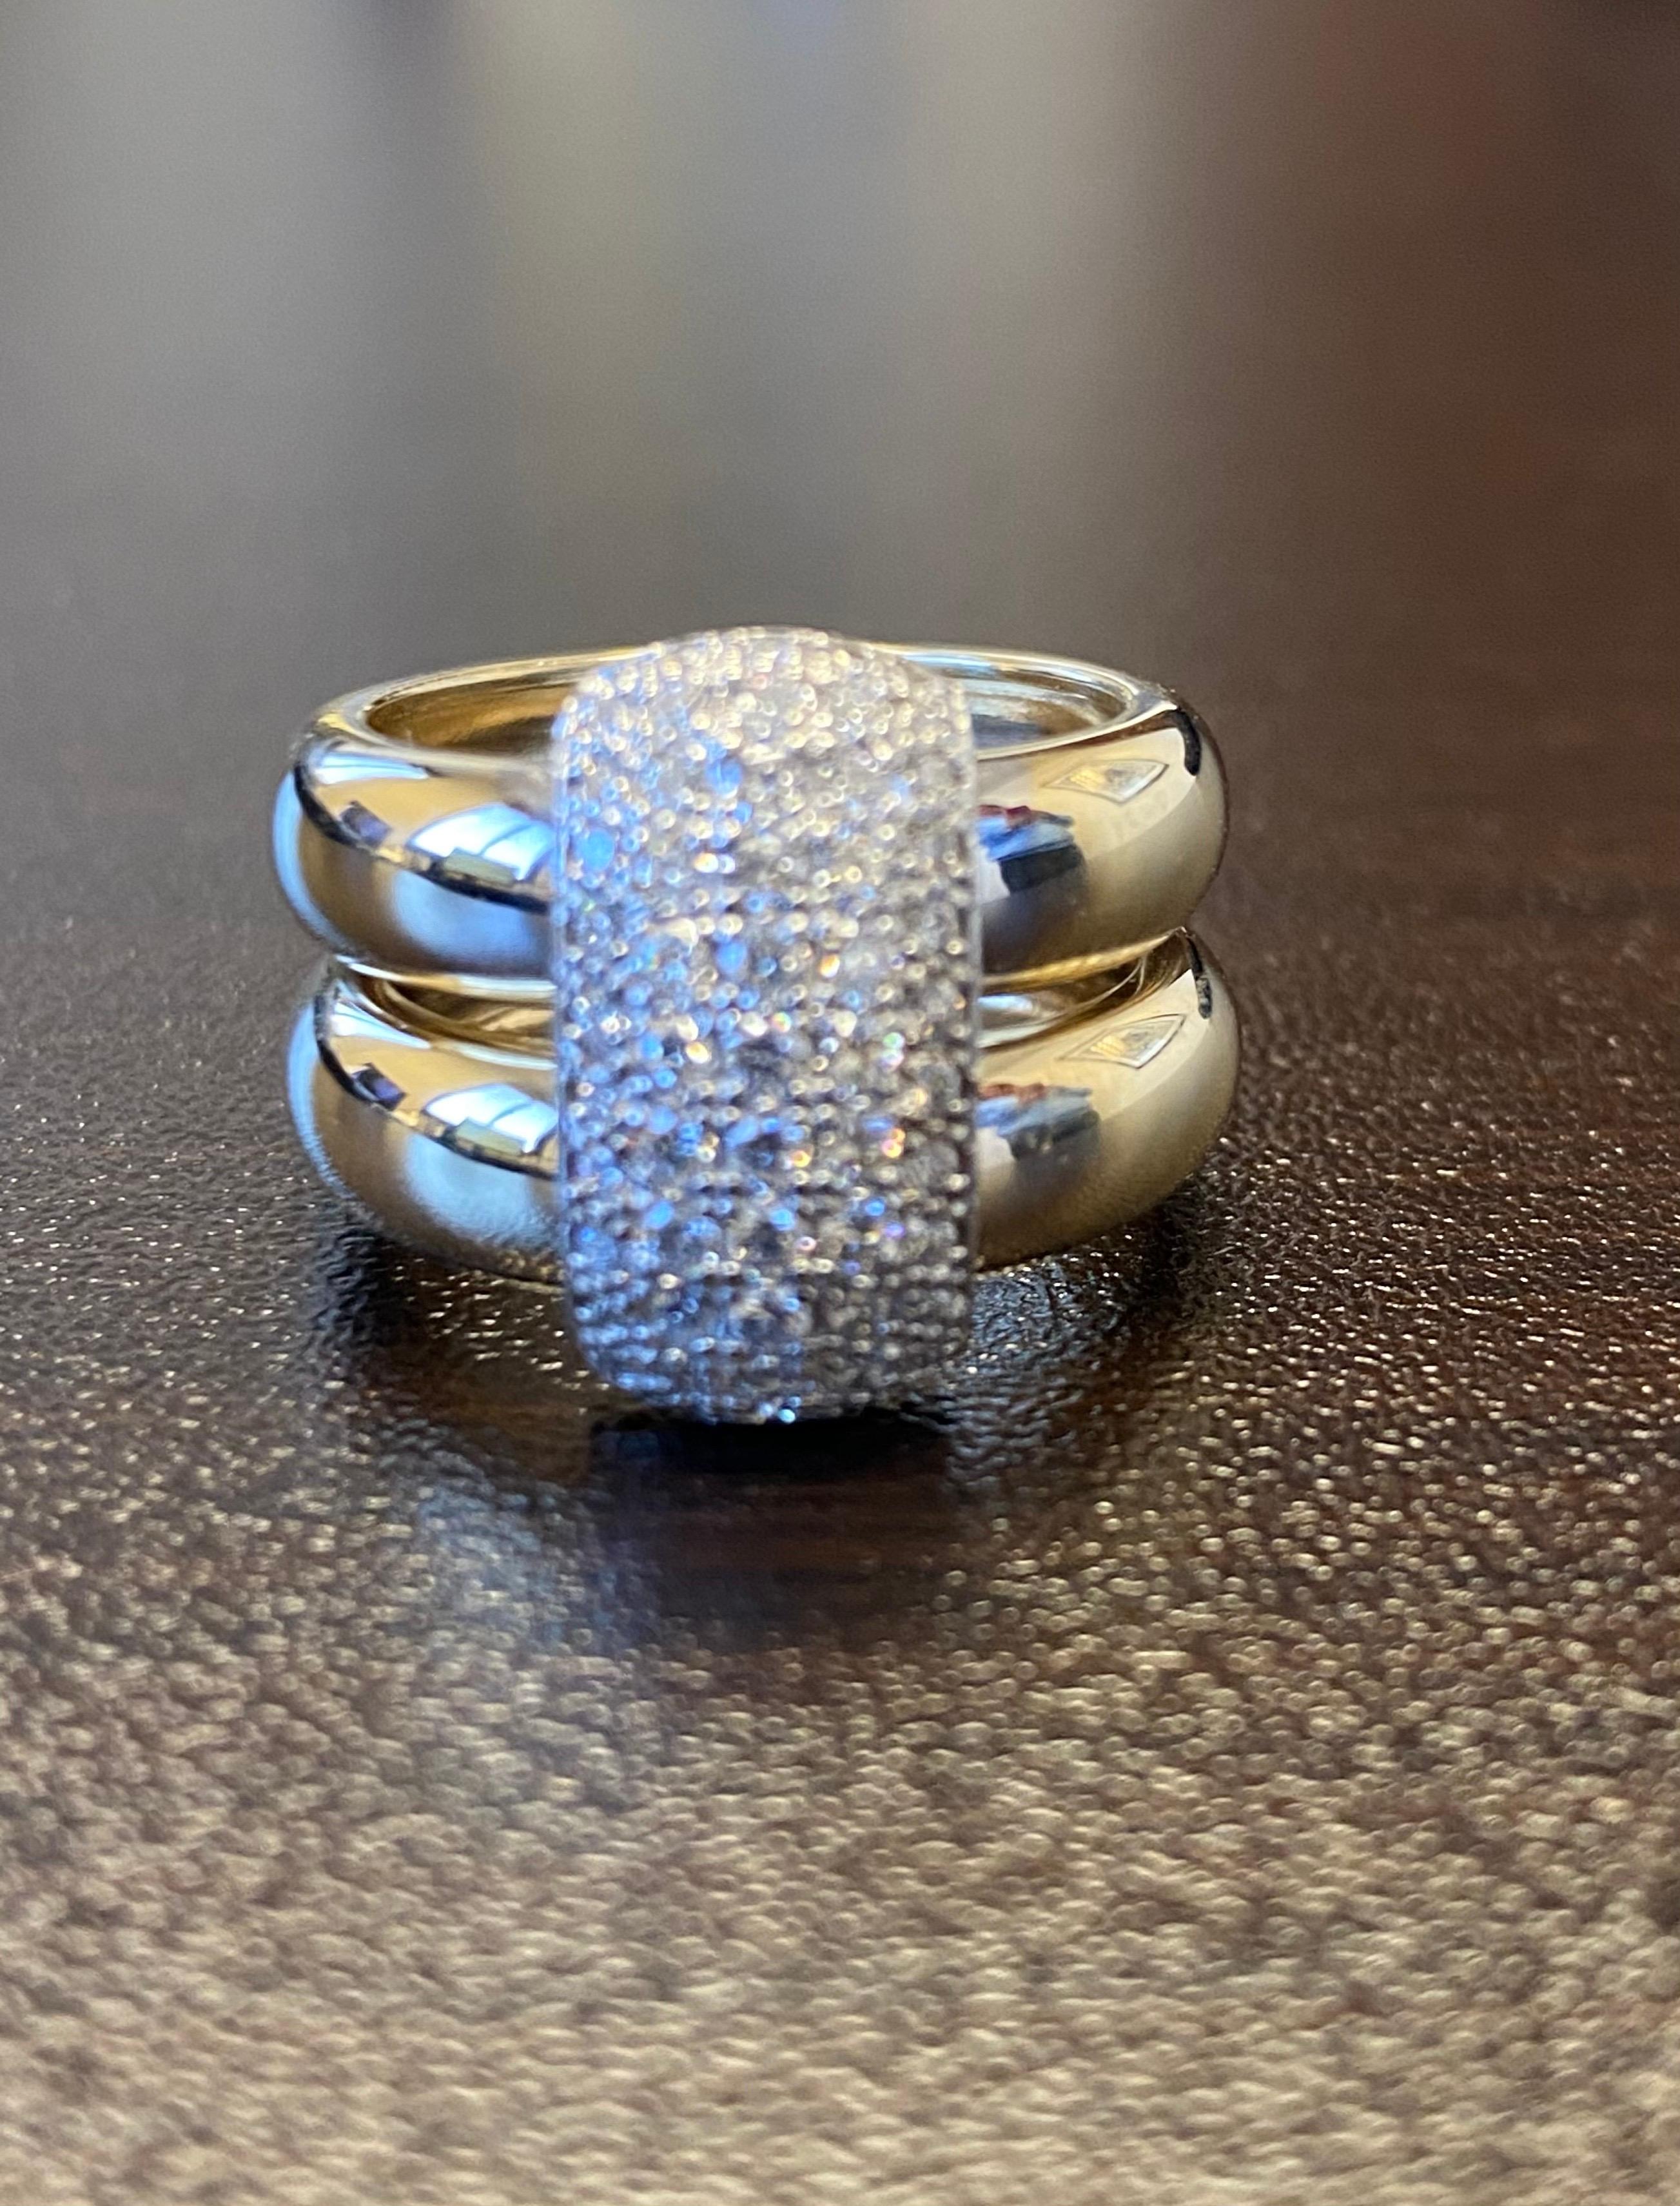 Diamond ring set in 14K white and yellow gold. The ring is set in a pave' setting, the total carat weight is 0.90 carats. The color of the stones are G, the clarity is SI1. The ring is a size 6.5.